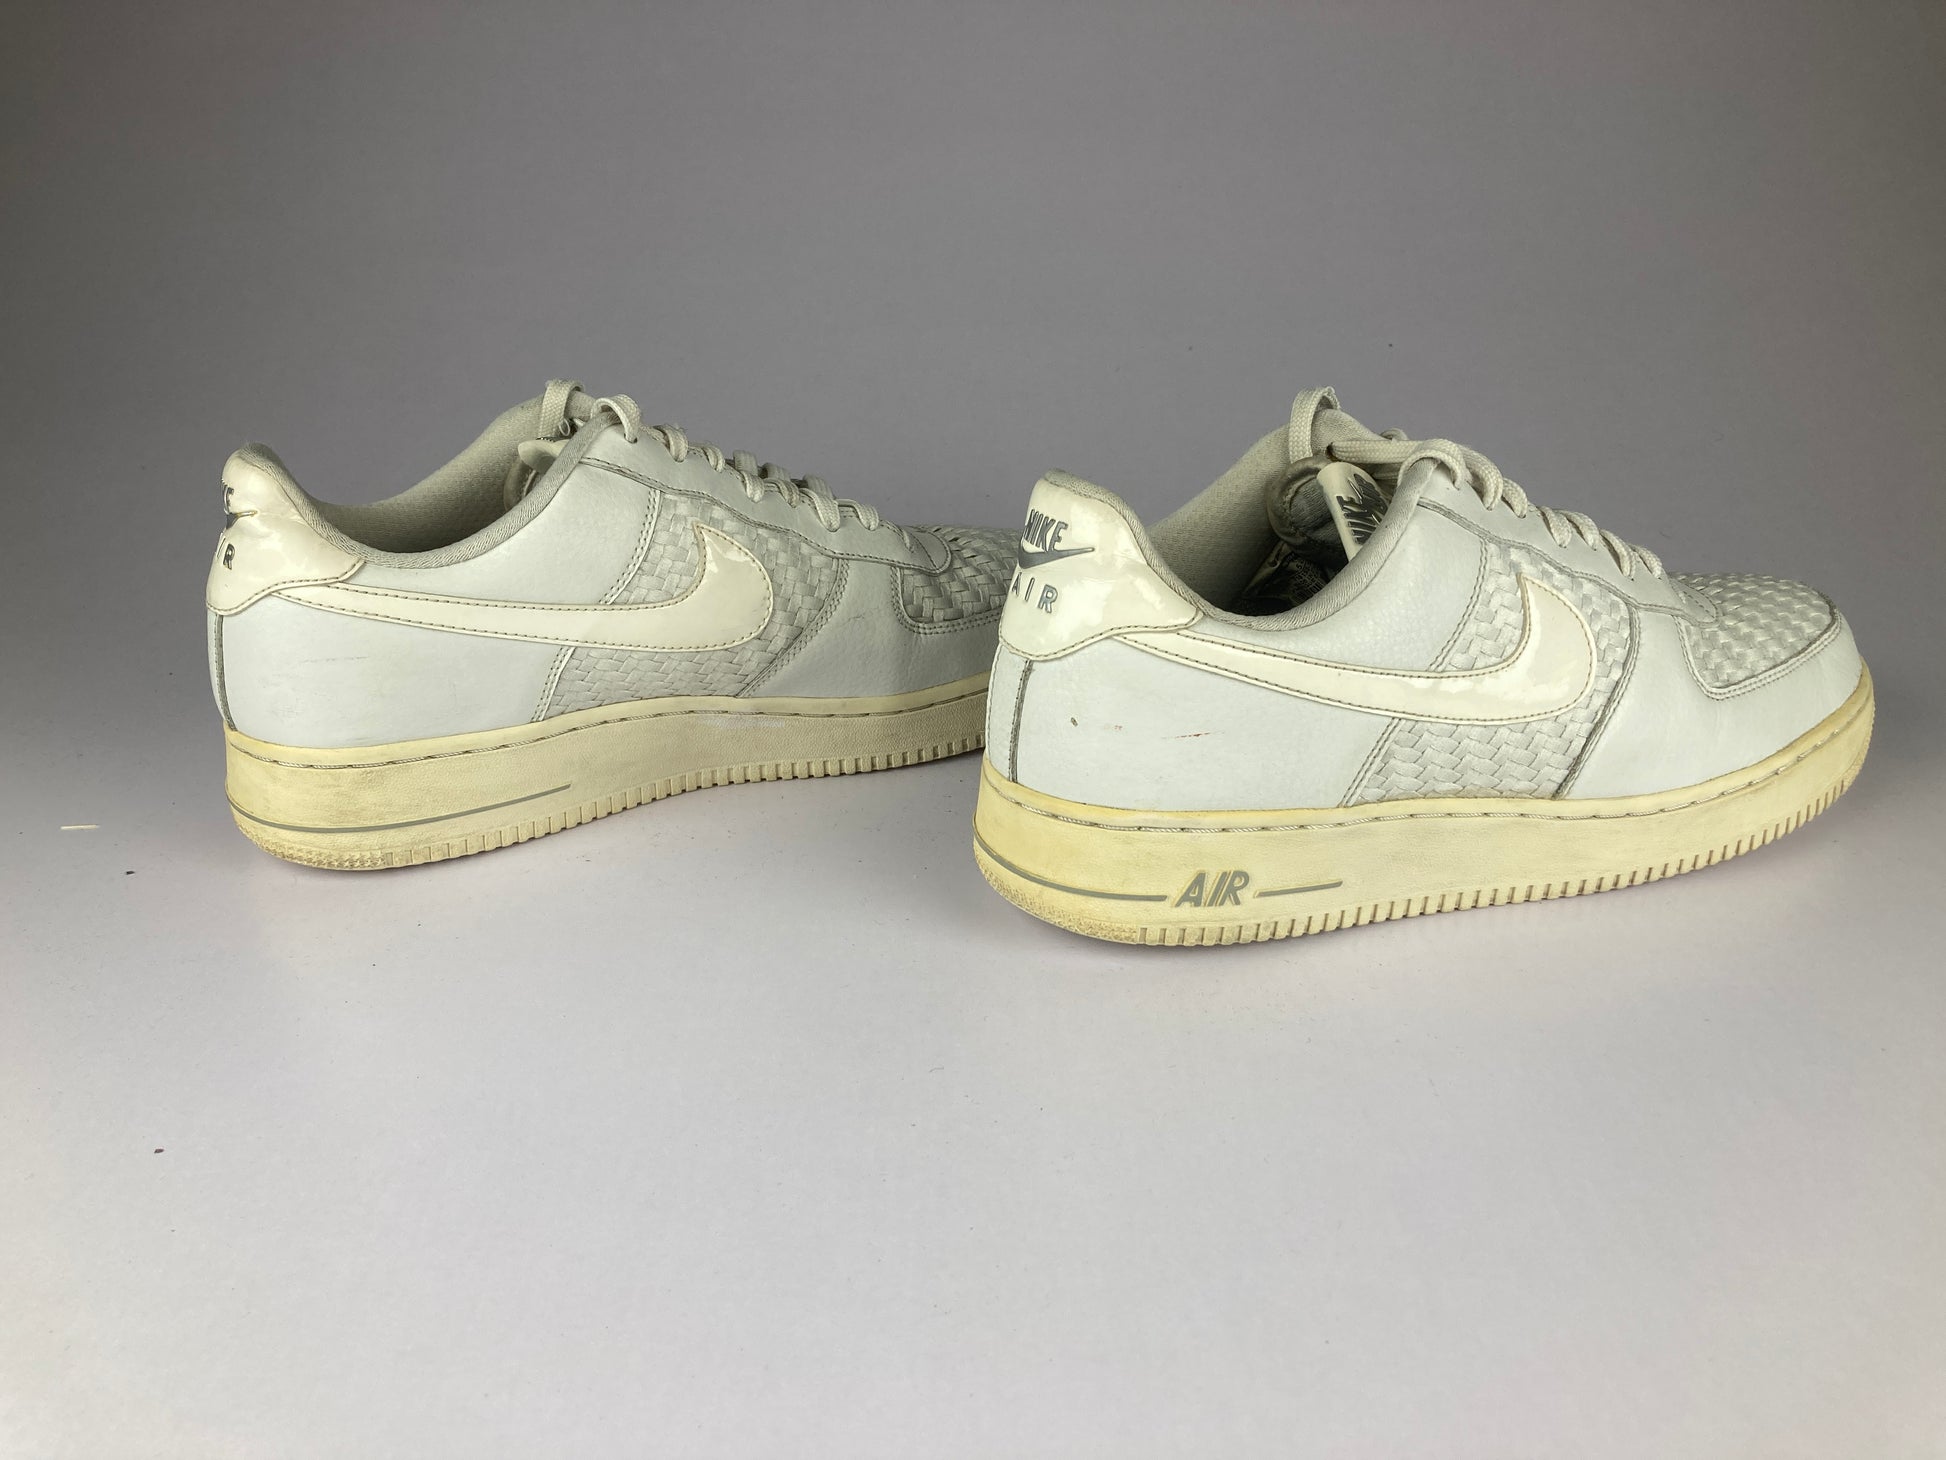 Nike Air Force 1'07 Lv8 Low Croc Summit White Casual Shoes 718152